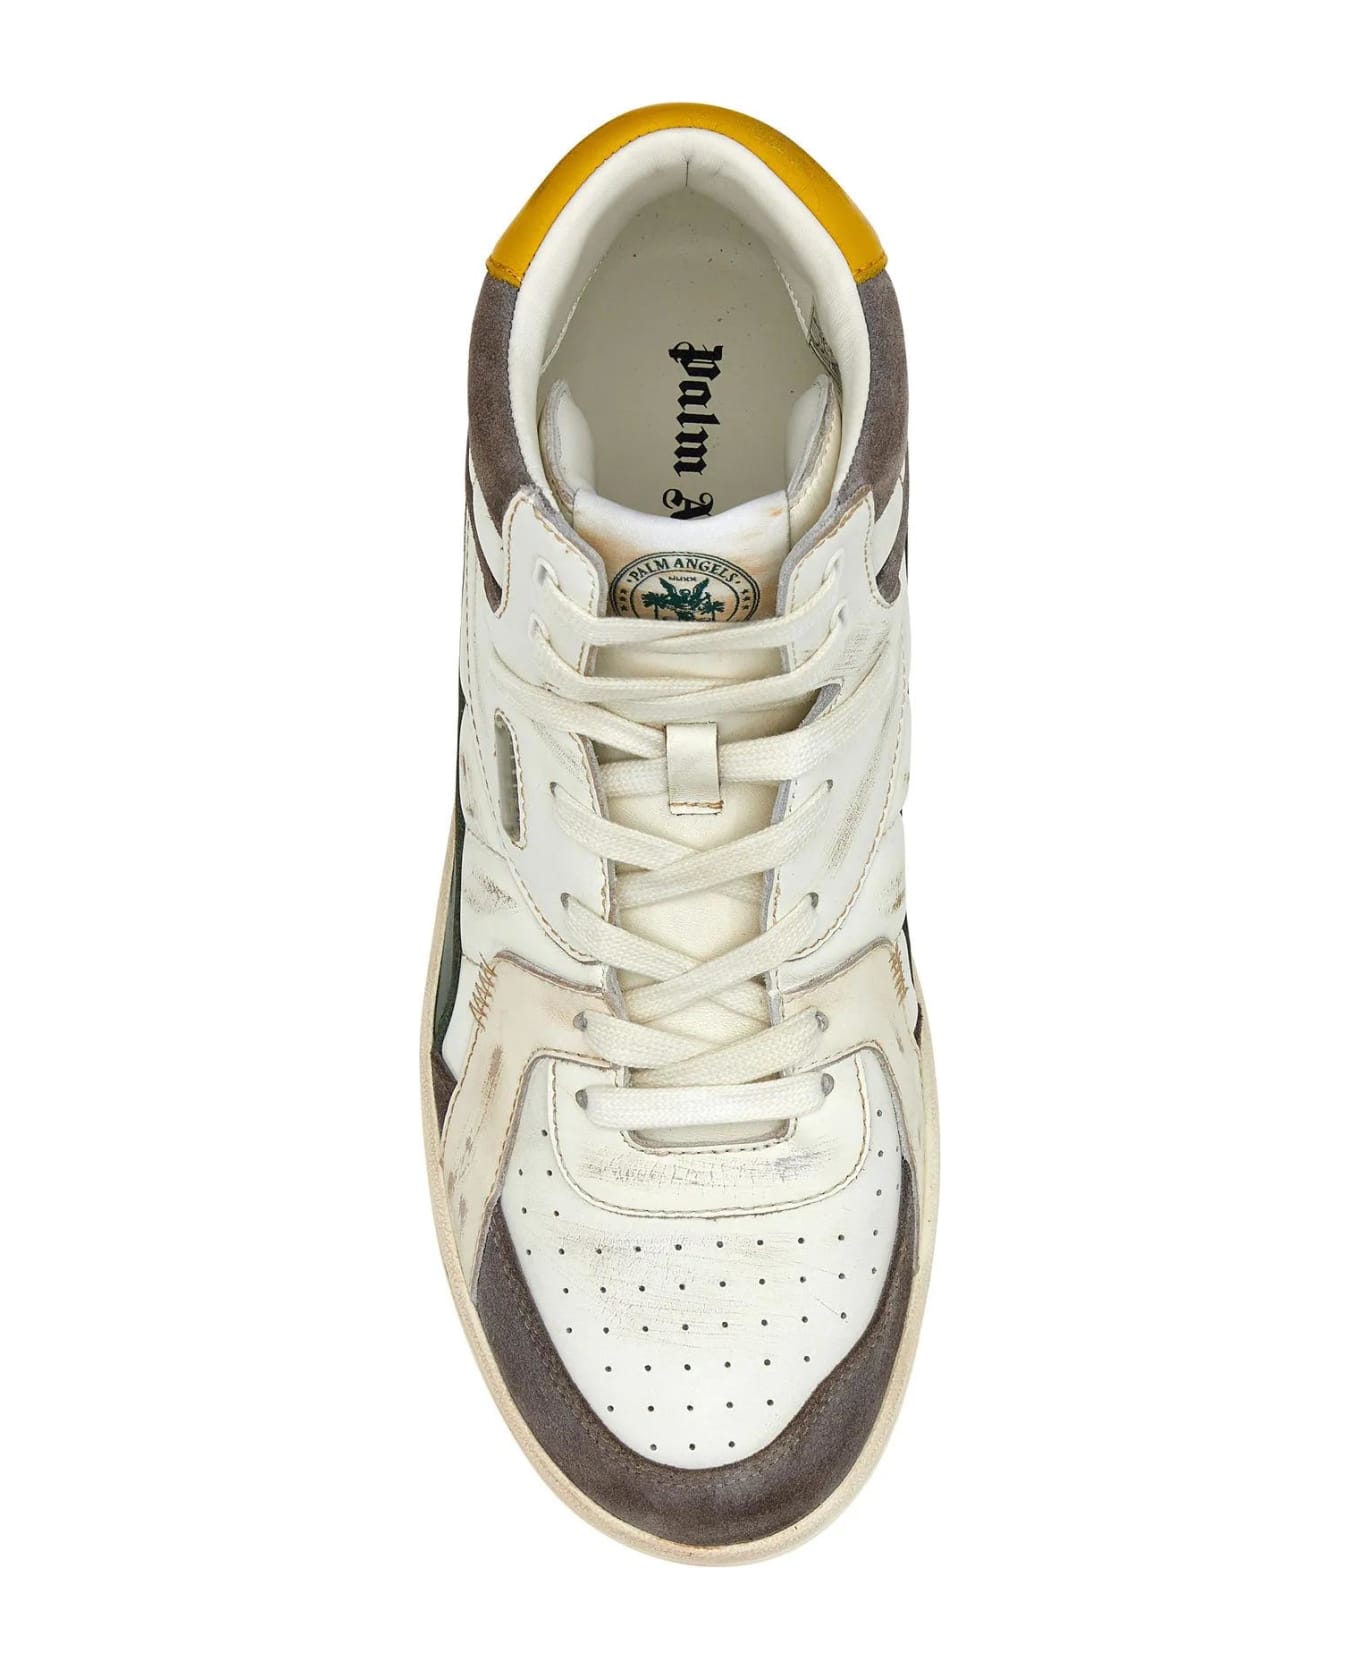 Palm Angels Multicolor Leather Palm University Sneakers - Bianco